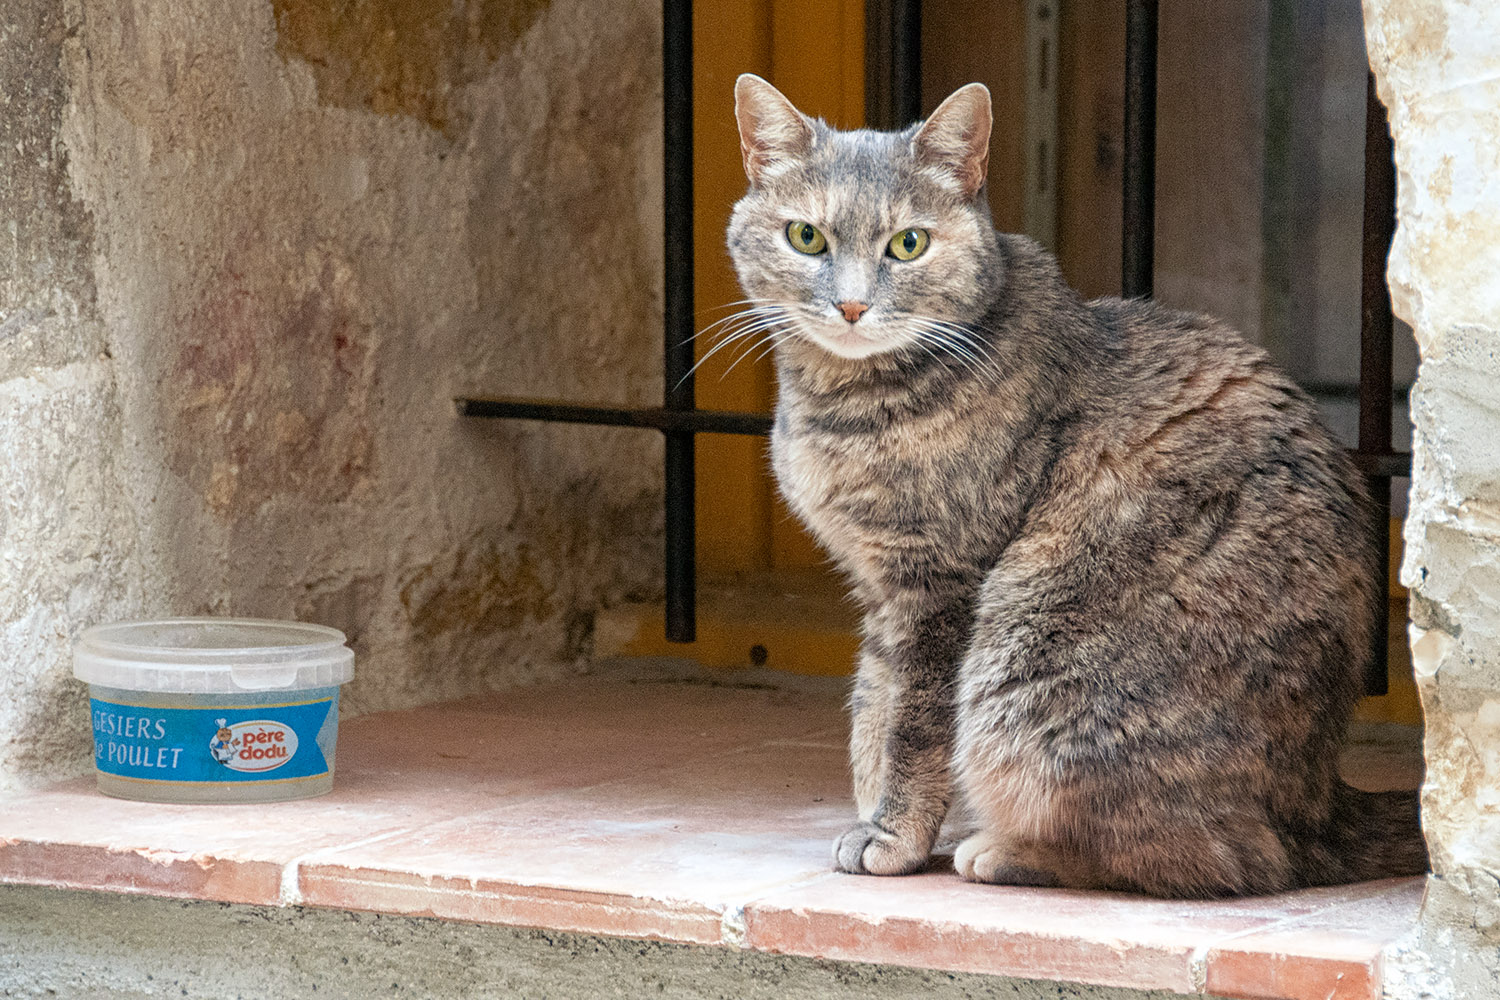 This cat from Tourrettes-sur-Loup was remarkably agile considering it was missing a front paw!